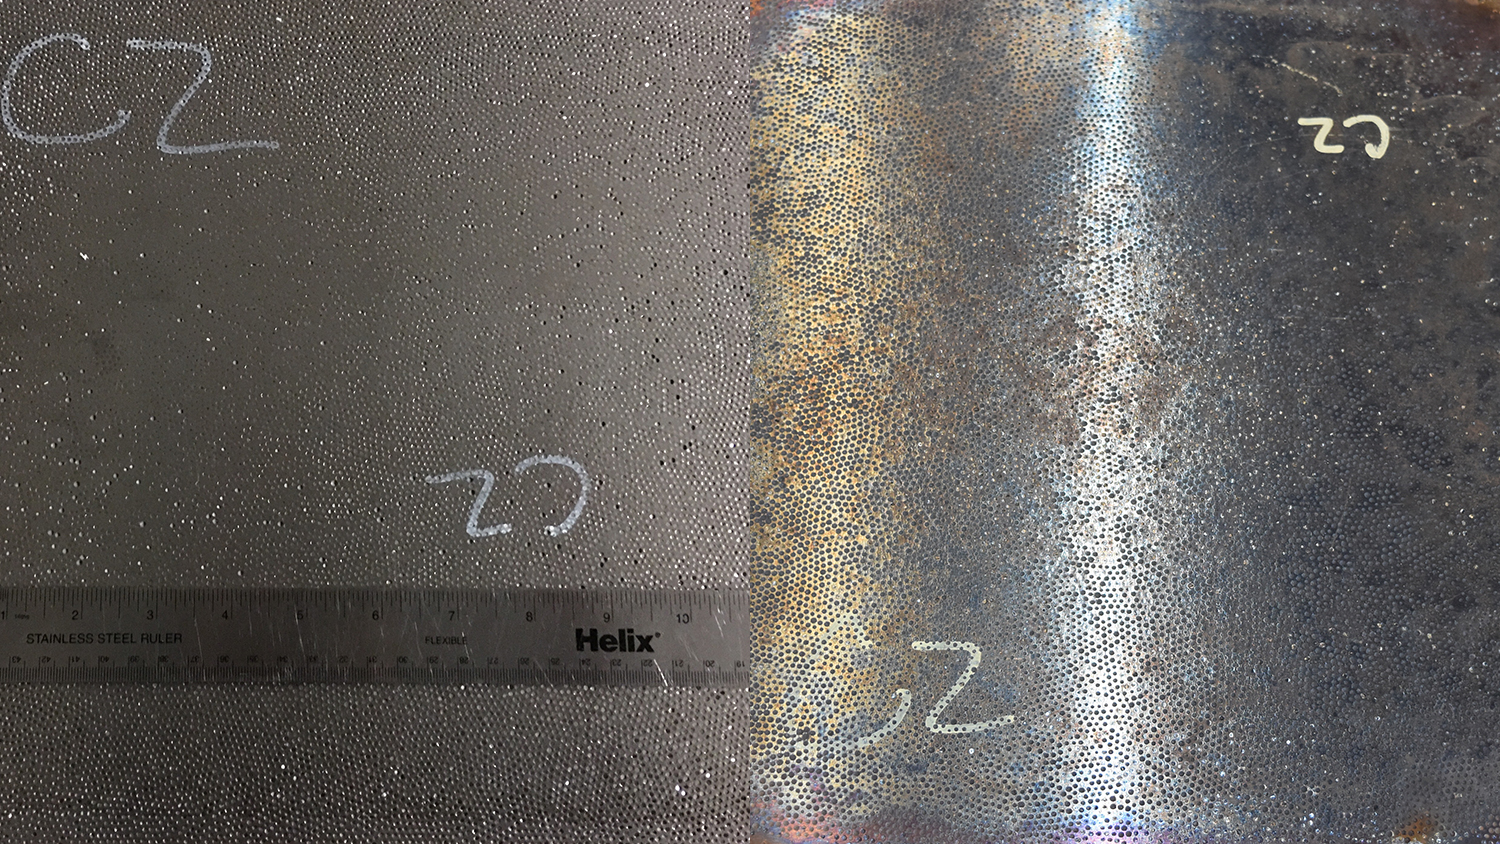 Two images of composite metal foam